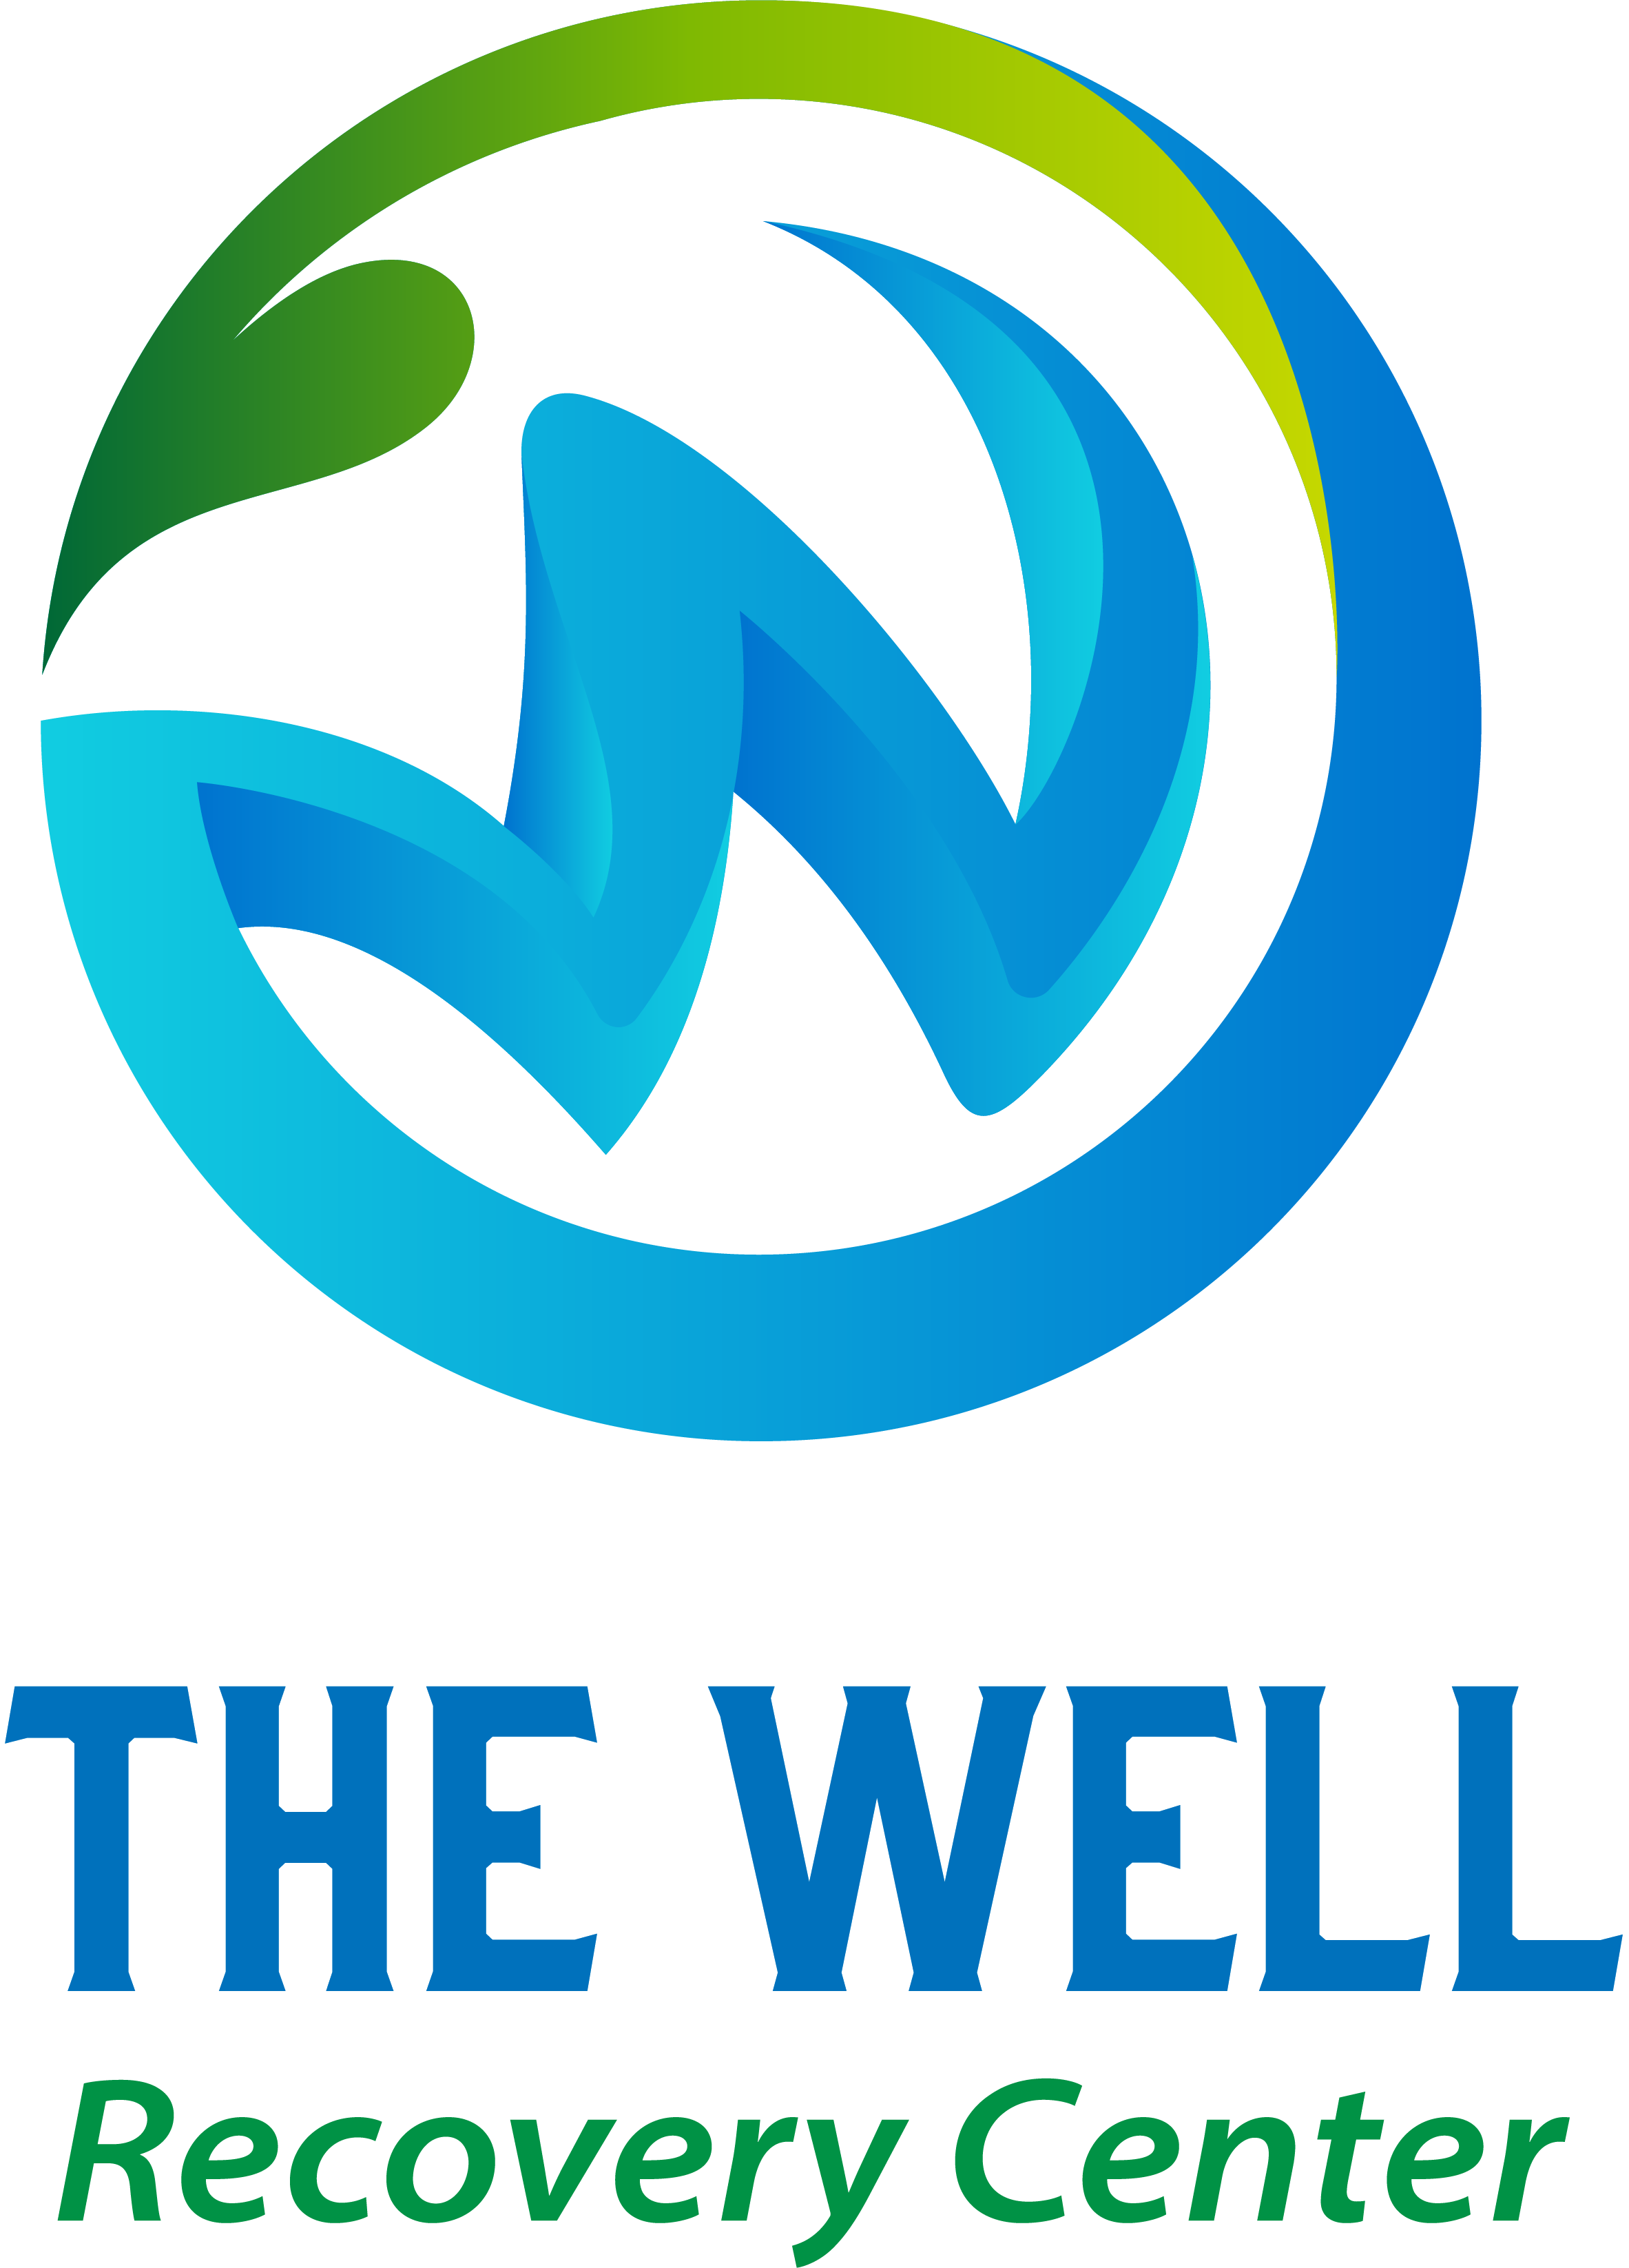 The Well Recovery Center